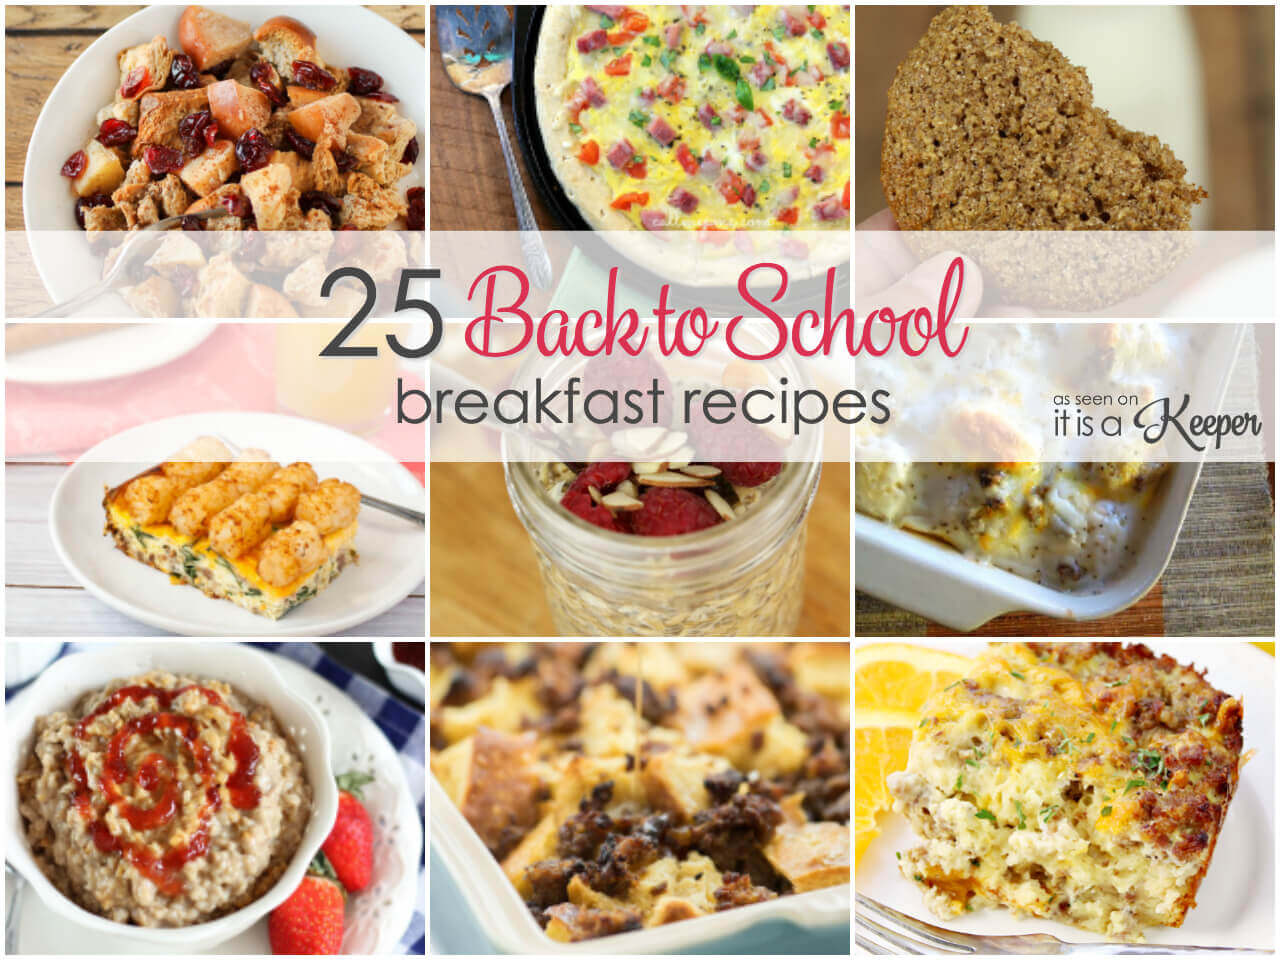 25 Easy Back to School Breakfast Recipes - easy crock pot recipes, casseroles and more 